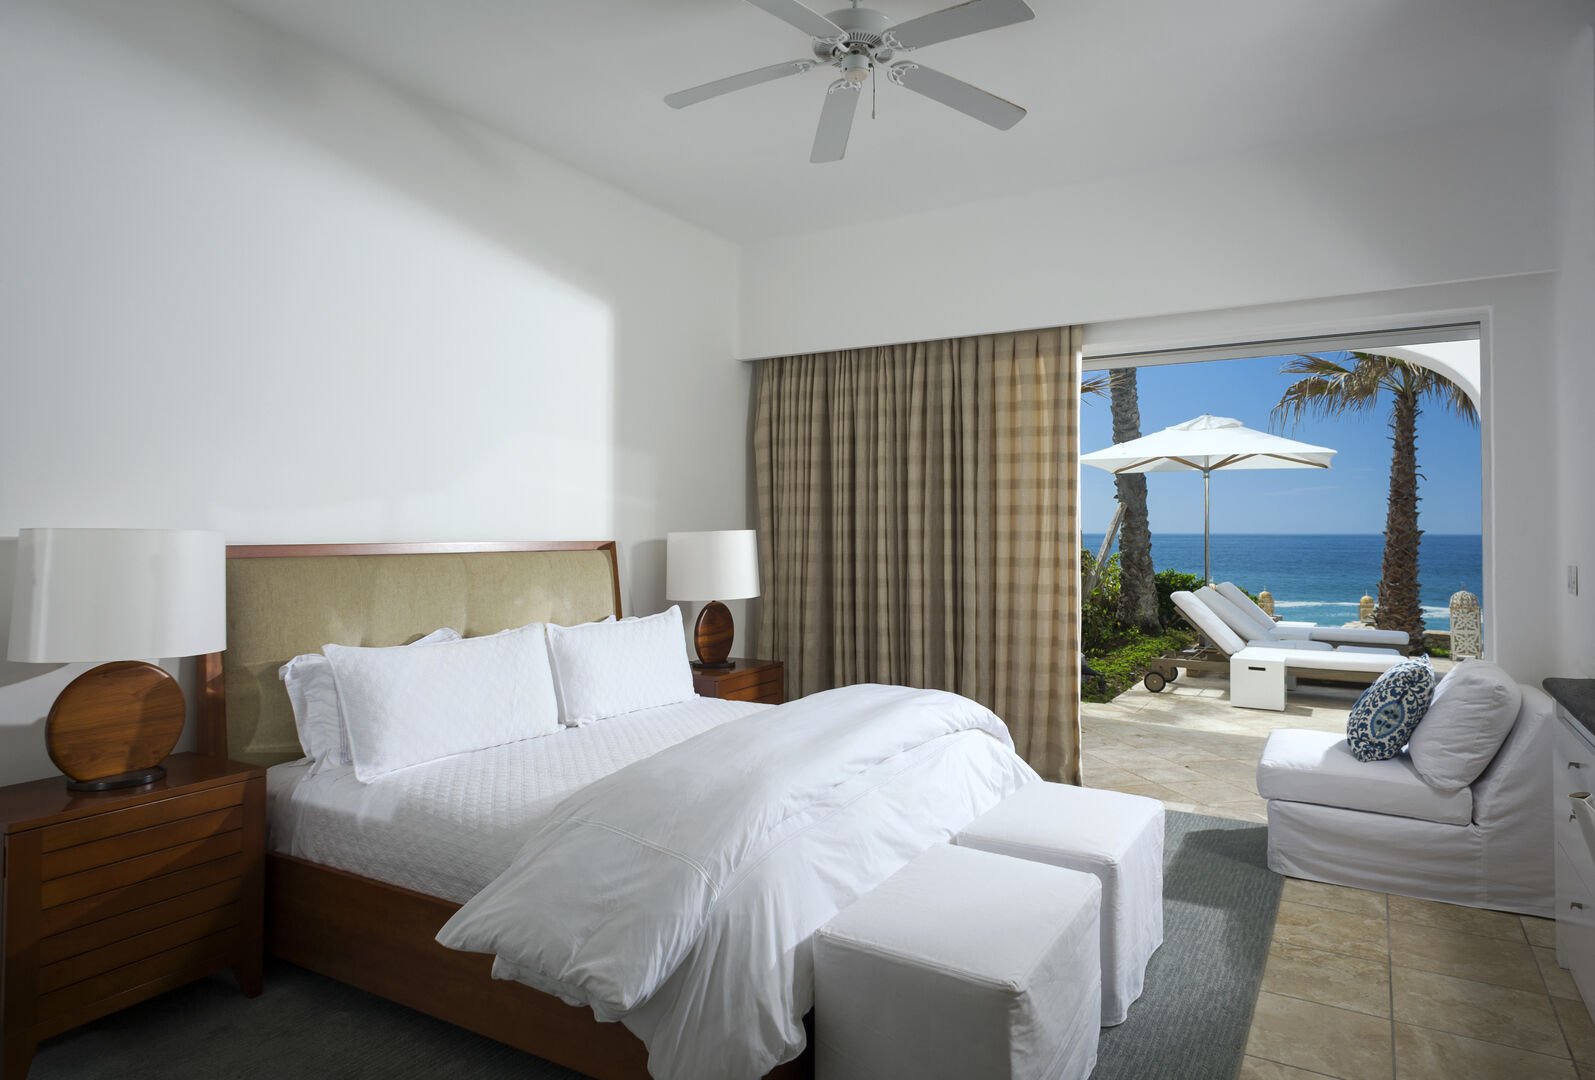 Second bedroom with a bed and the ocean view